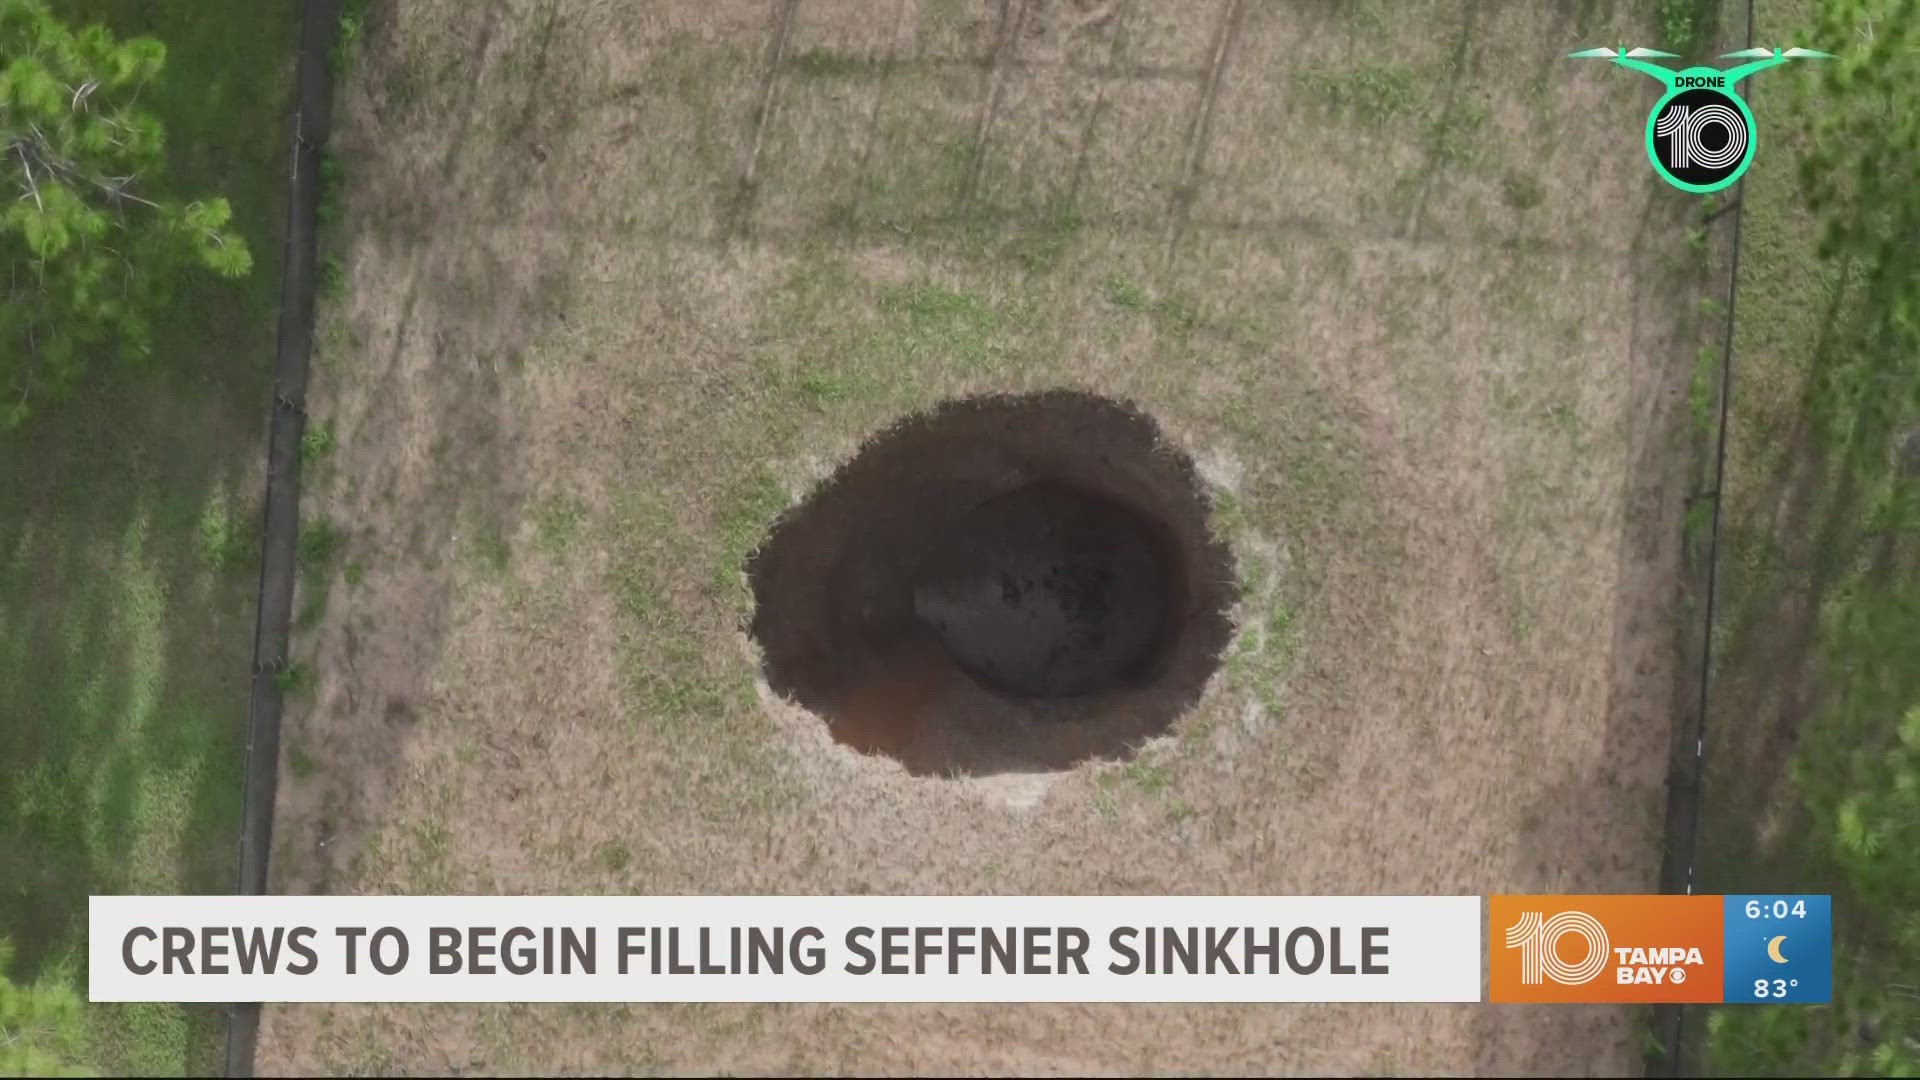 The 19-foot sinkhole that showed movement Monday appeared not to increase in size overnight.